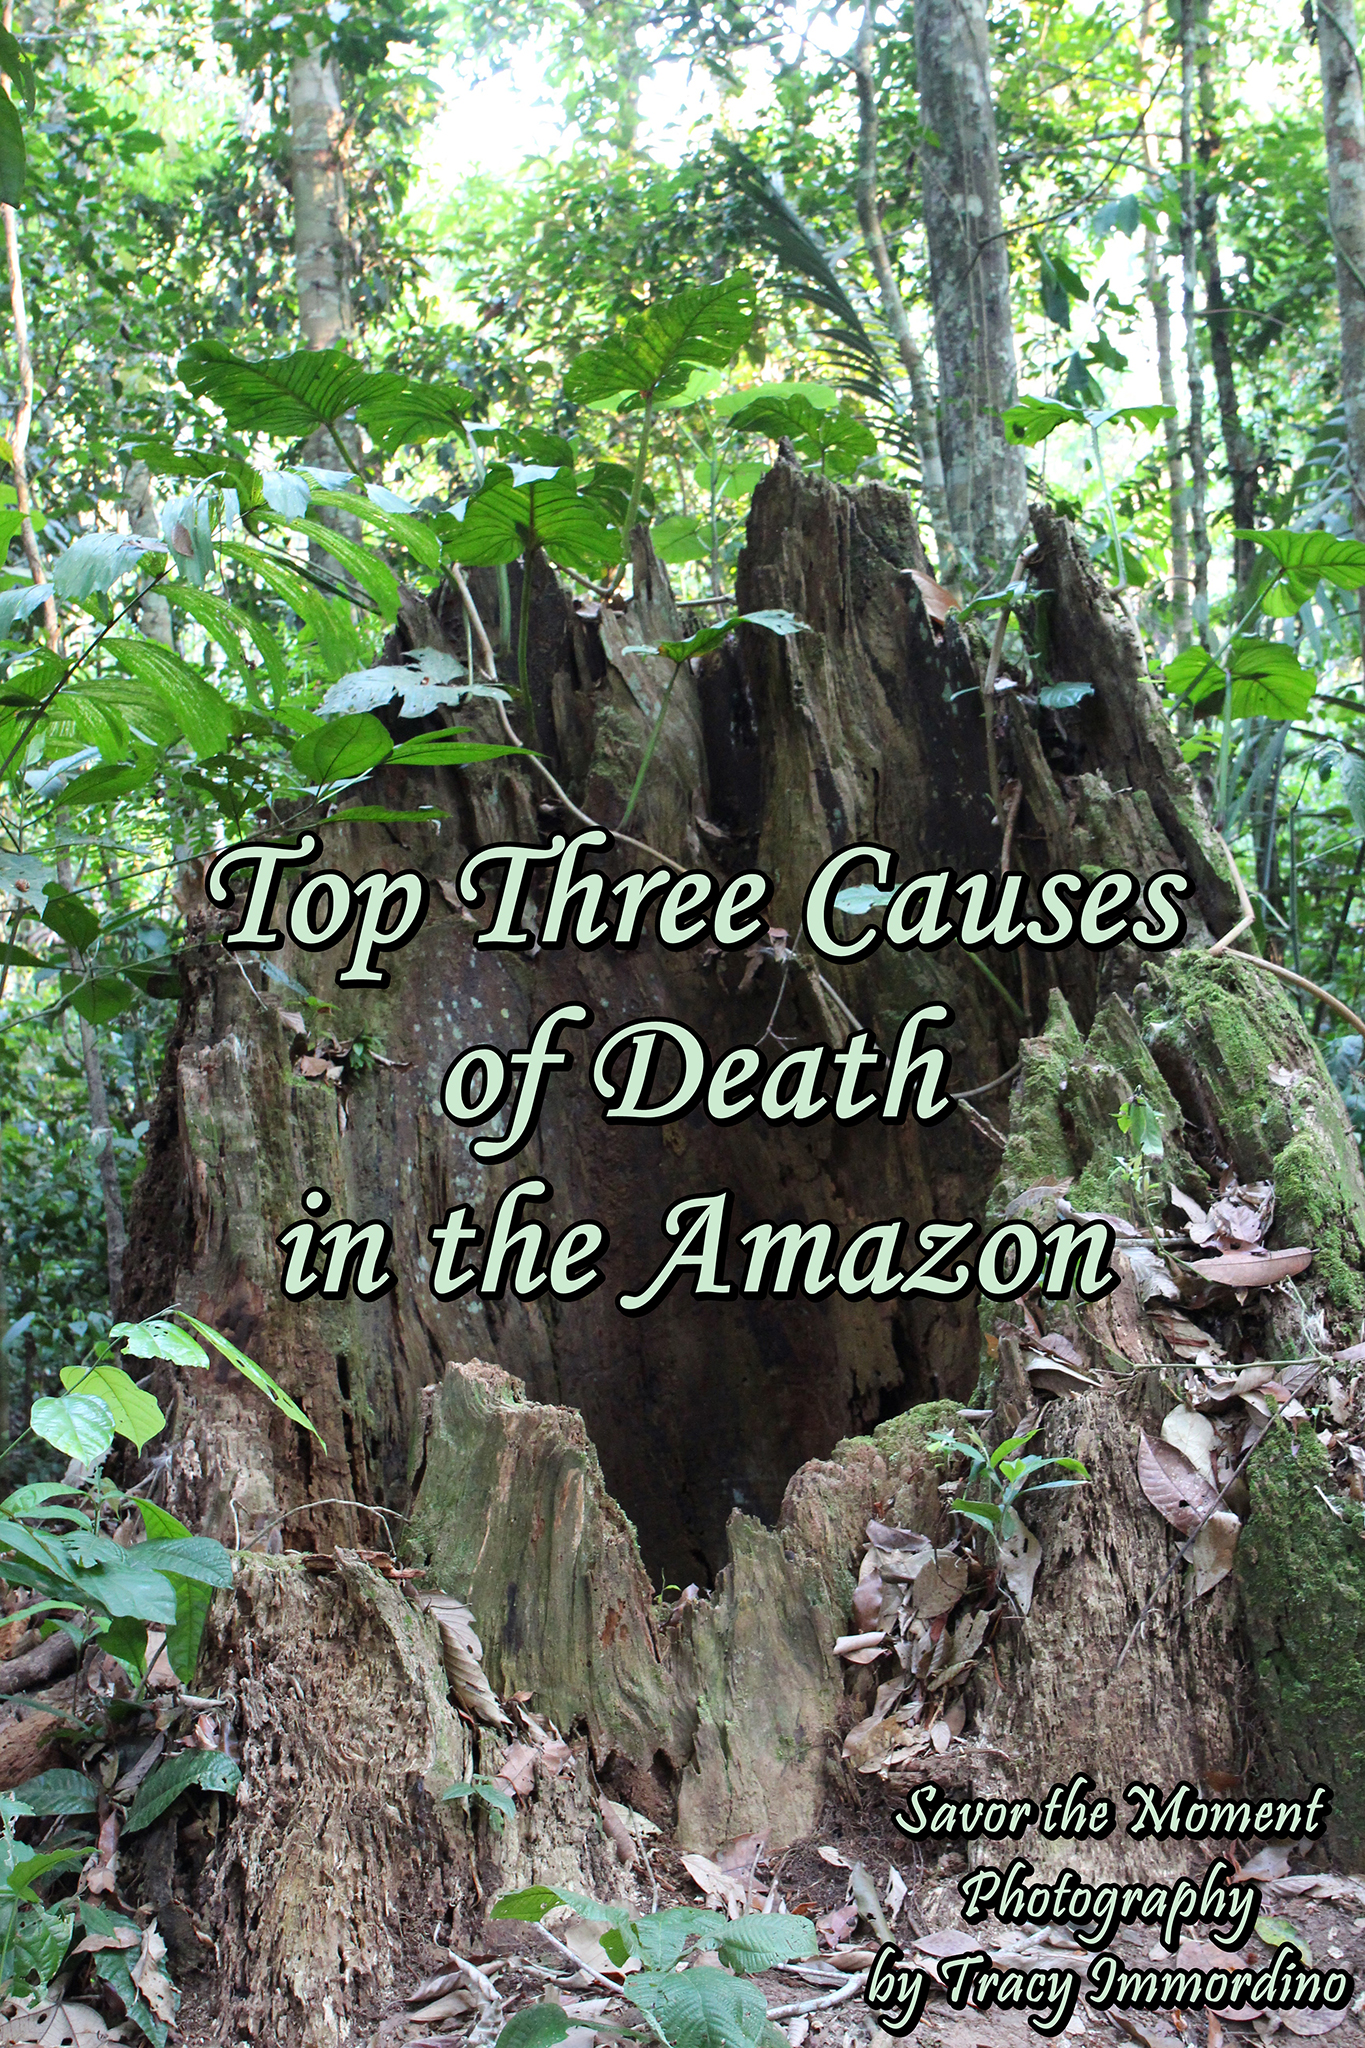 Top Three Causes of Death in the Amazon